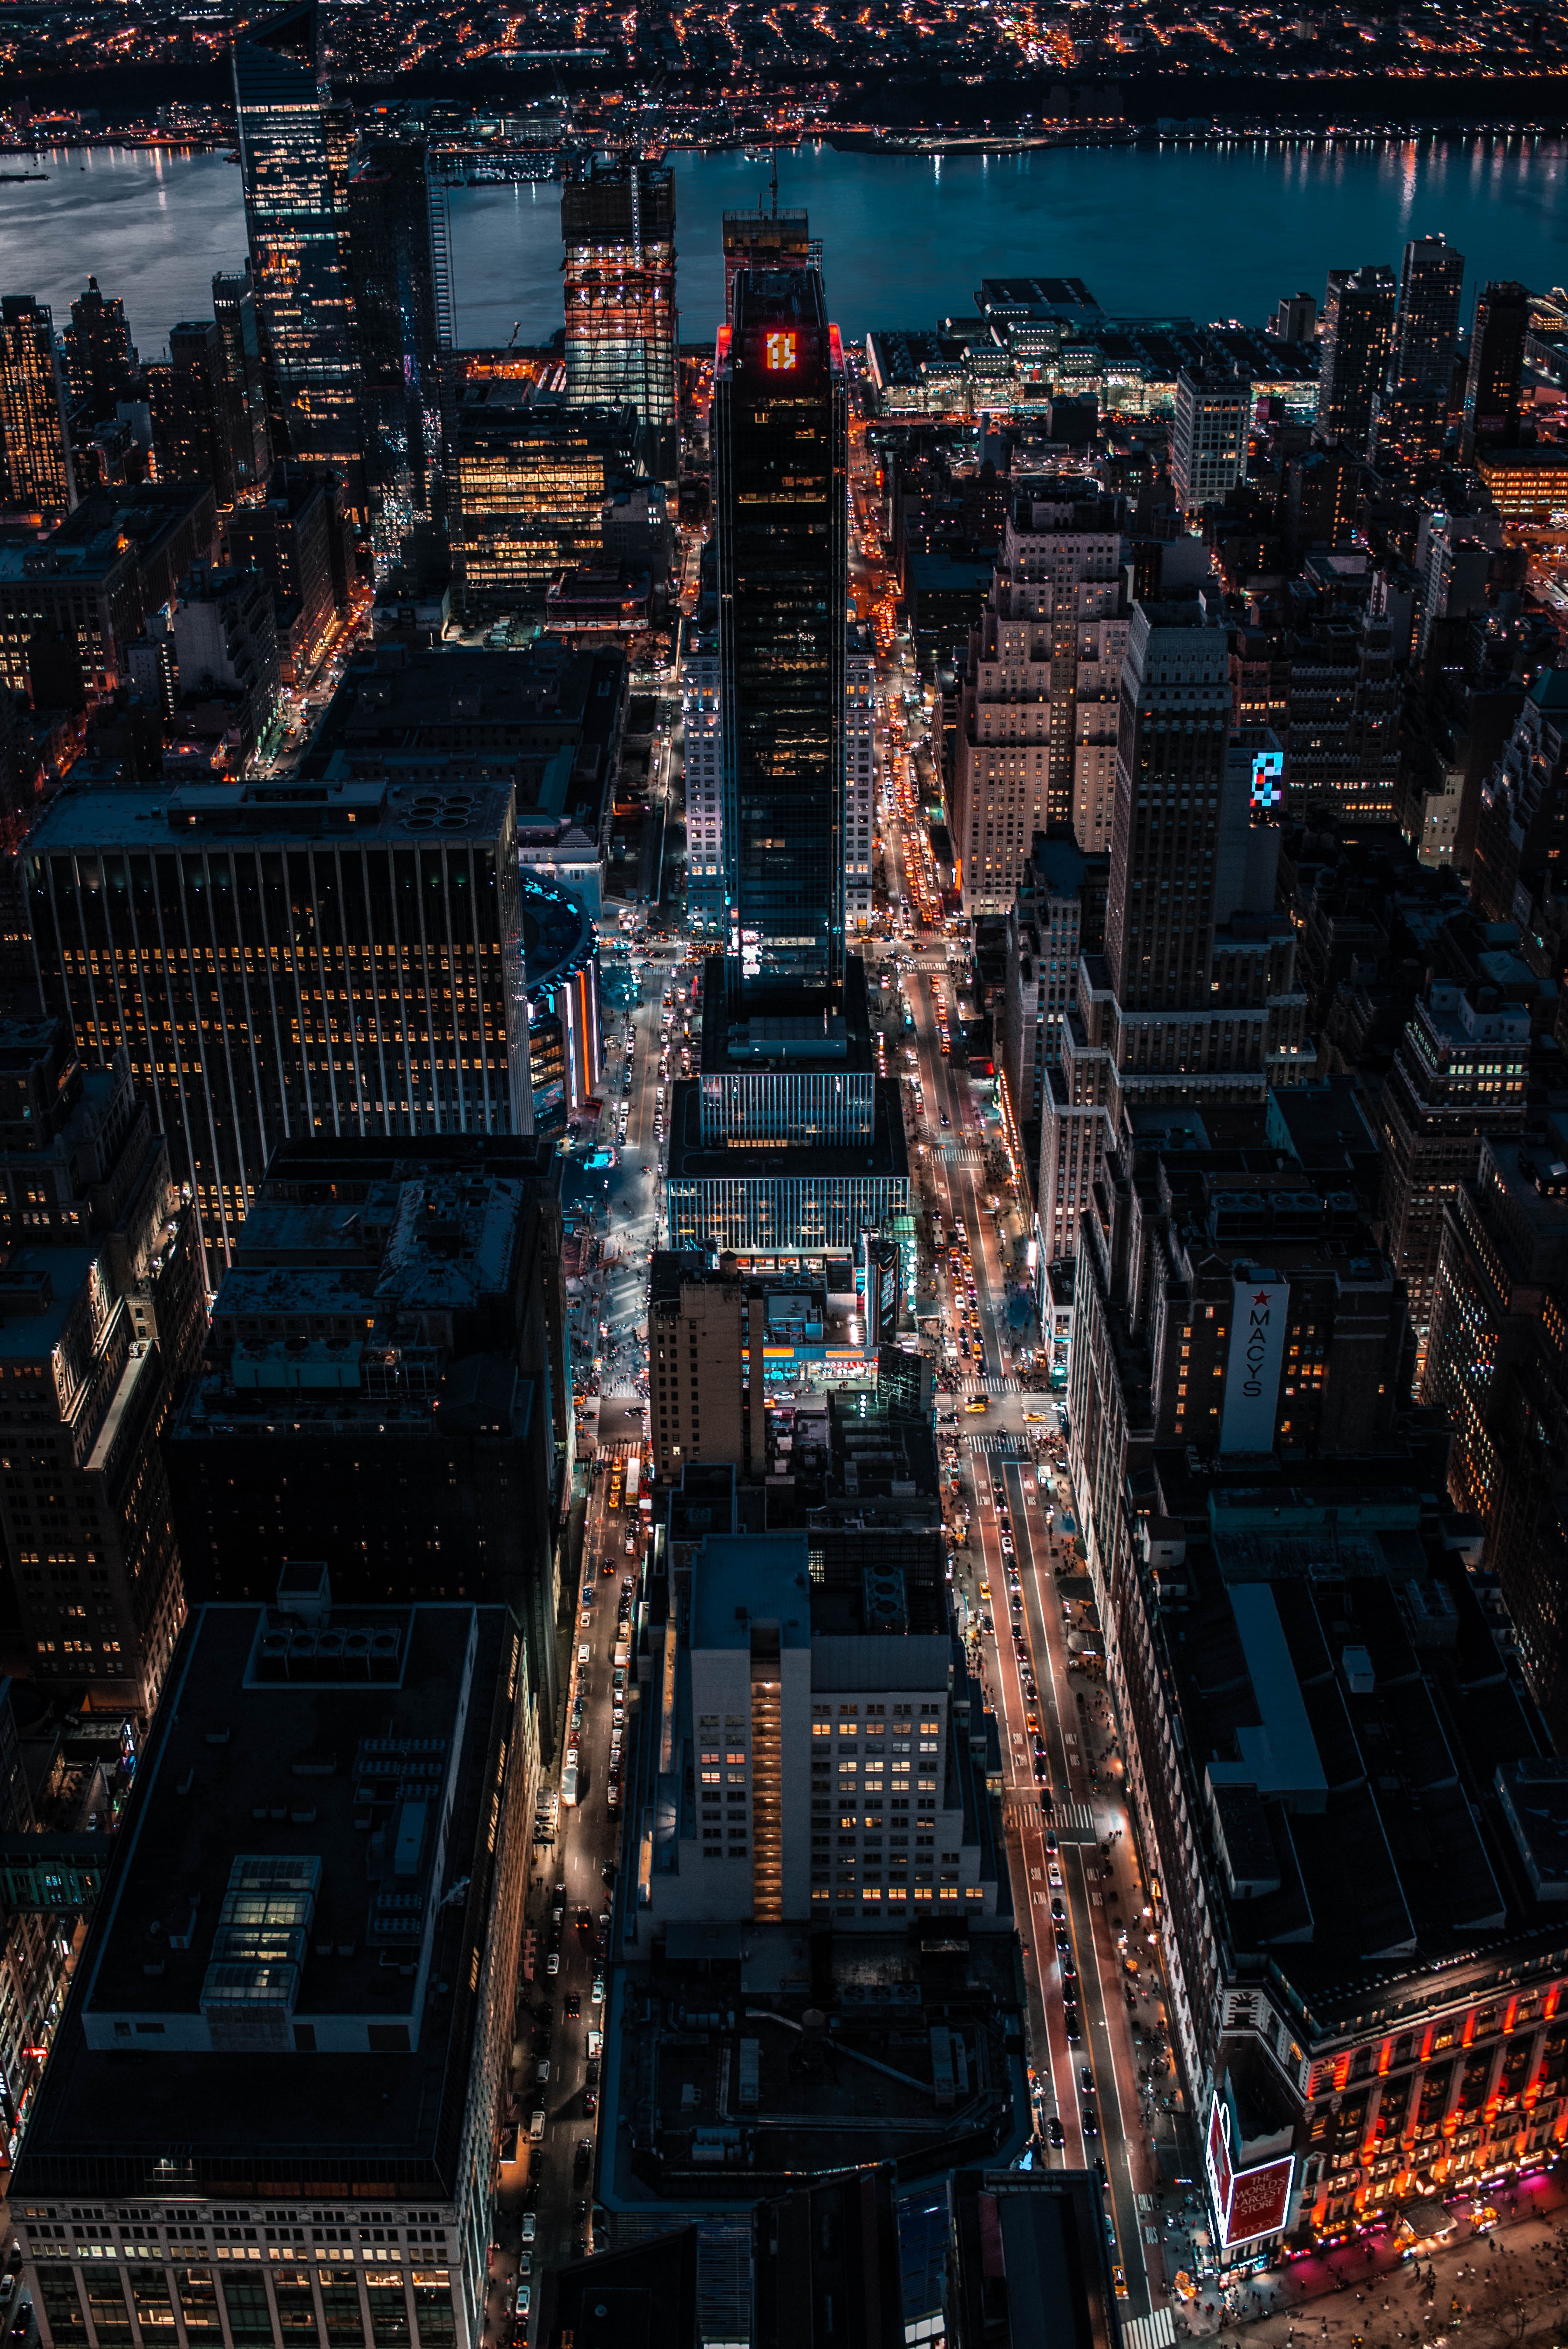 city lights, megapolis, megalopolis, view from above, cities, building, night city, skyscrapers